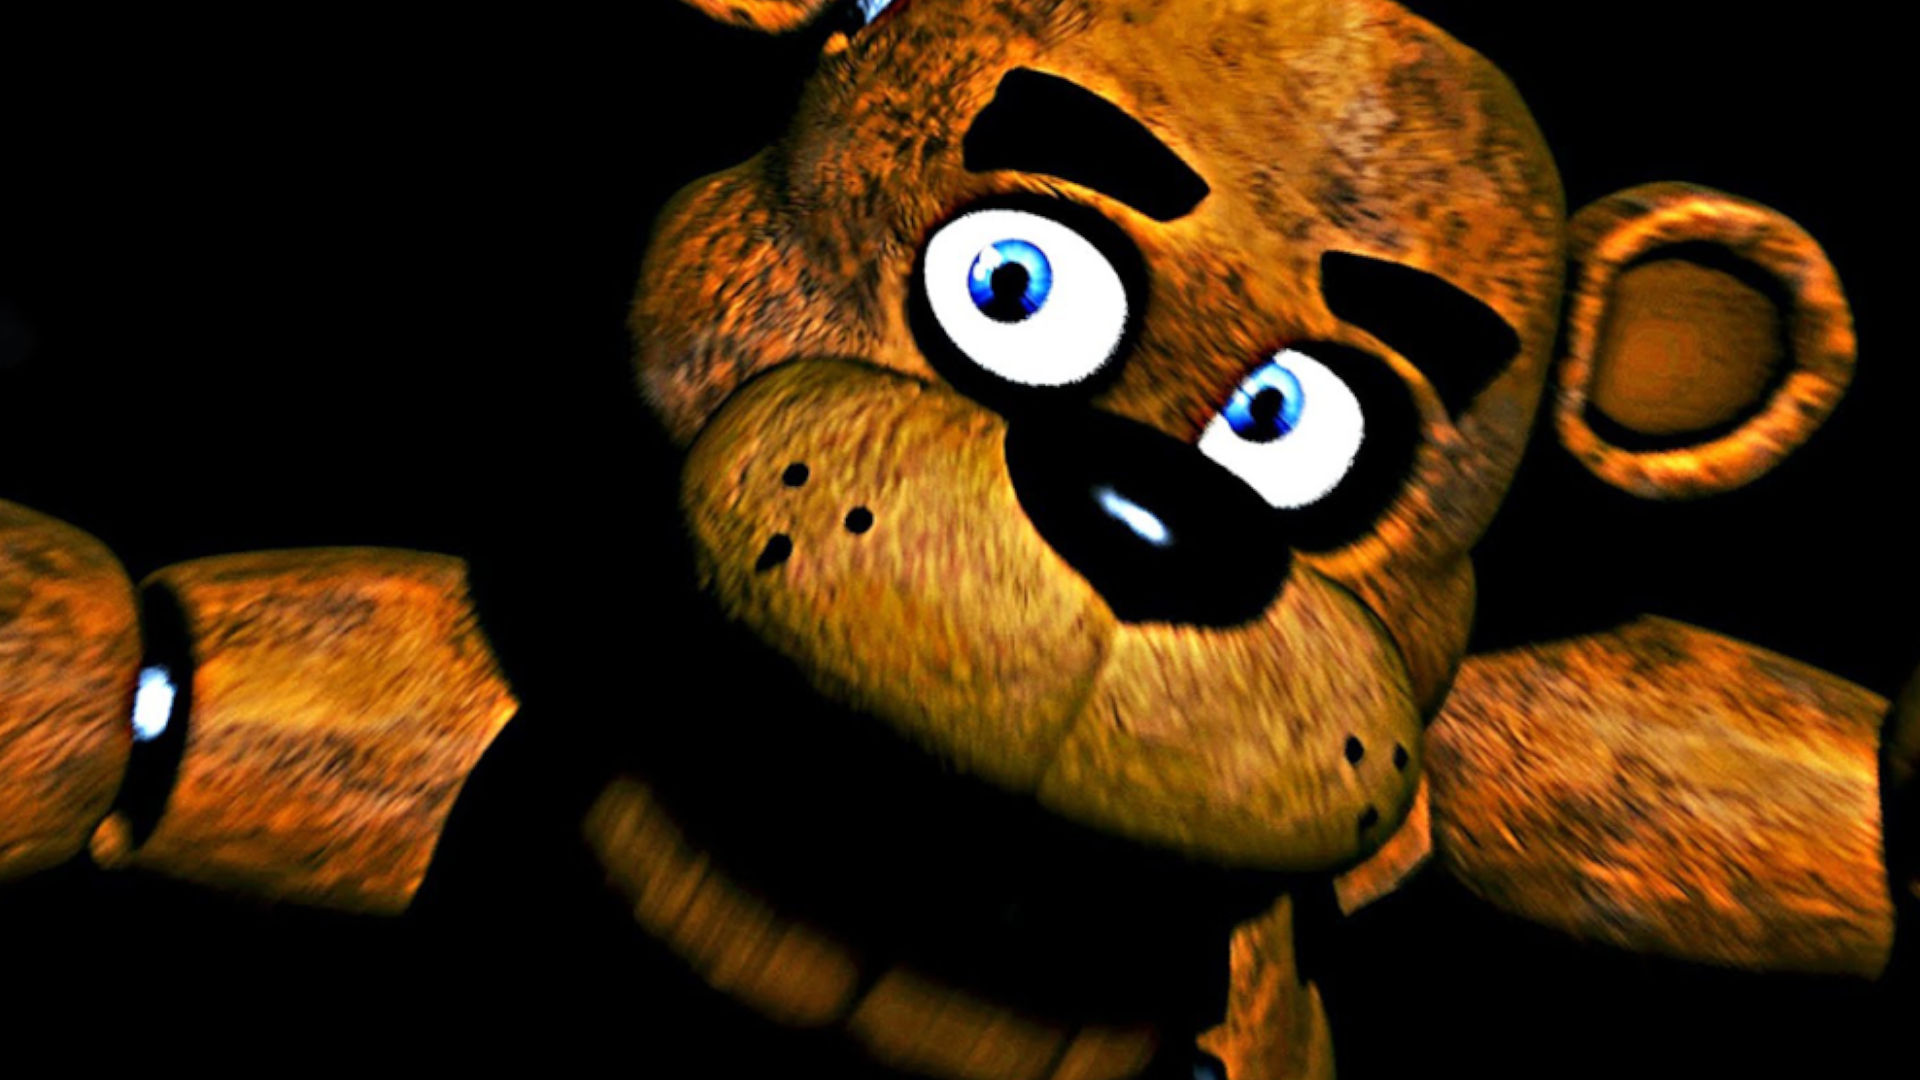 Freddy jumpscare kills Gregory in 3rd Person View - Five Nights at